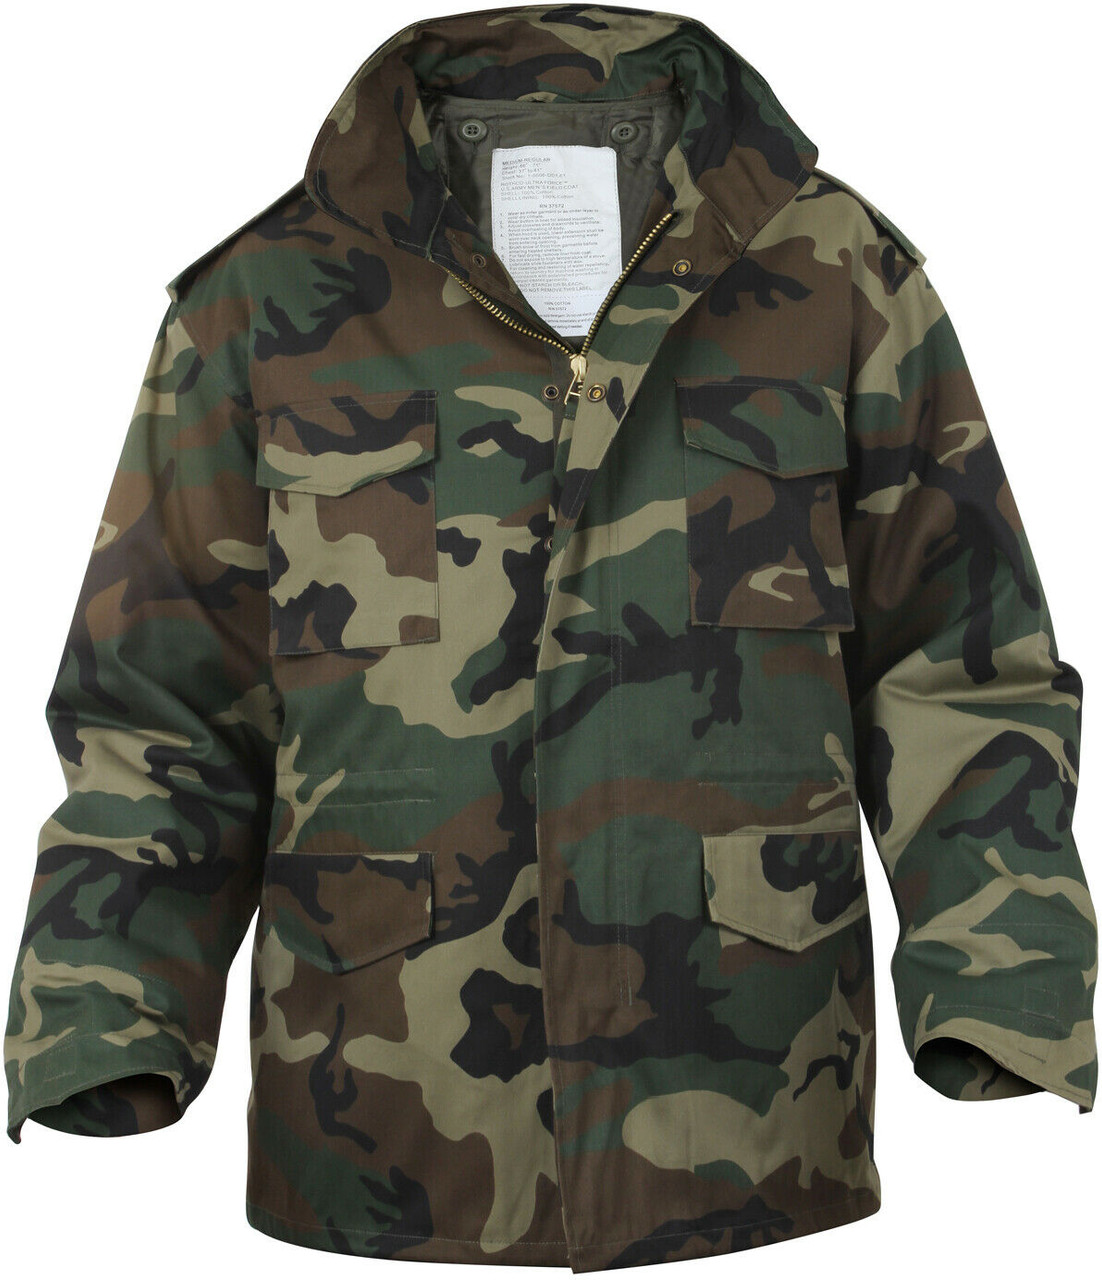 Shop Woodland Camo Soft Shell Concealed Carry Jackets - Fatigues Army Navy